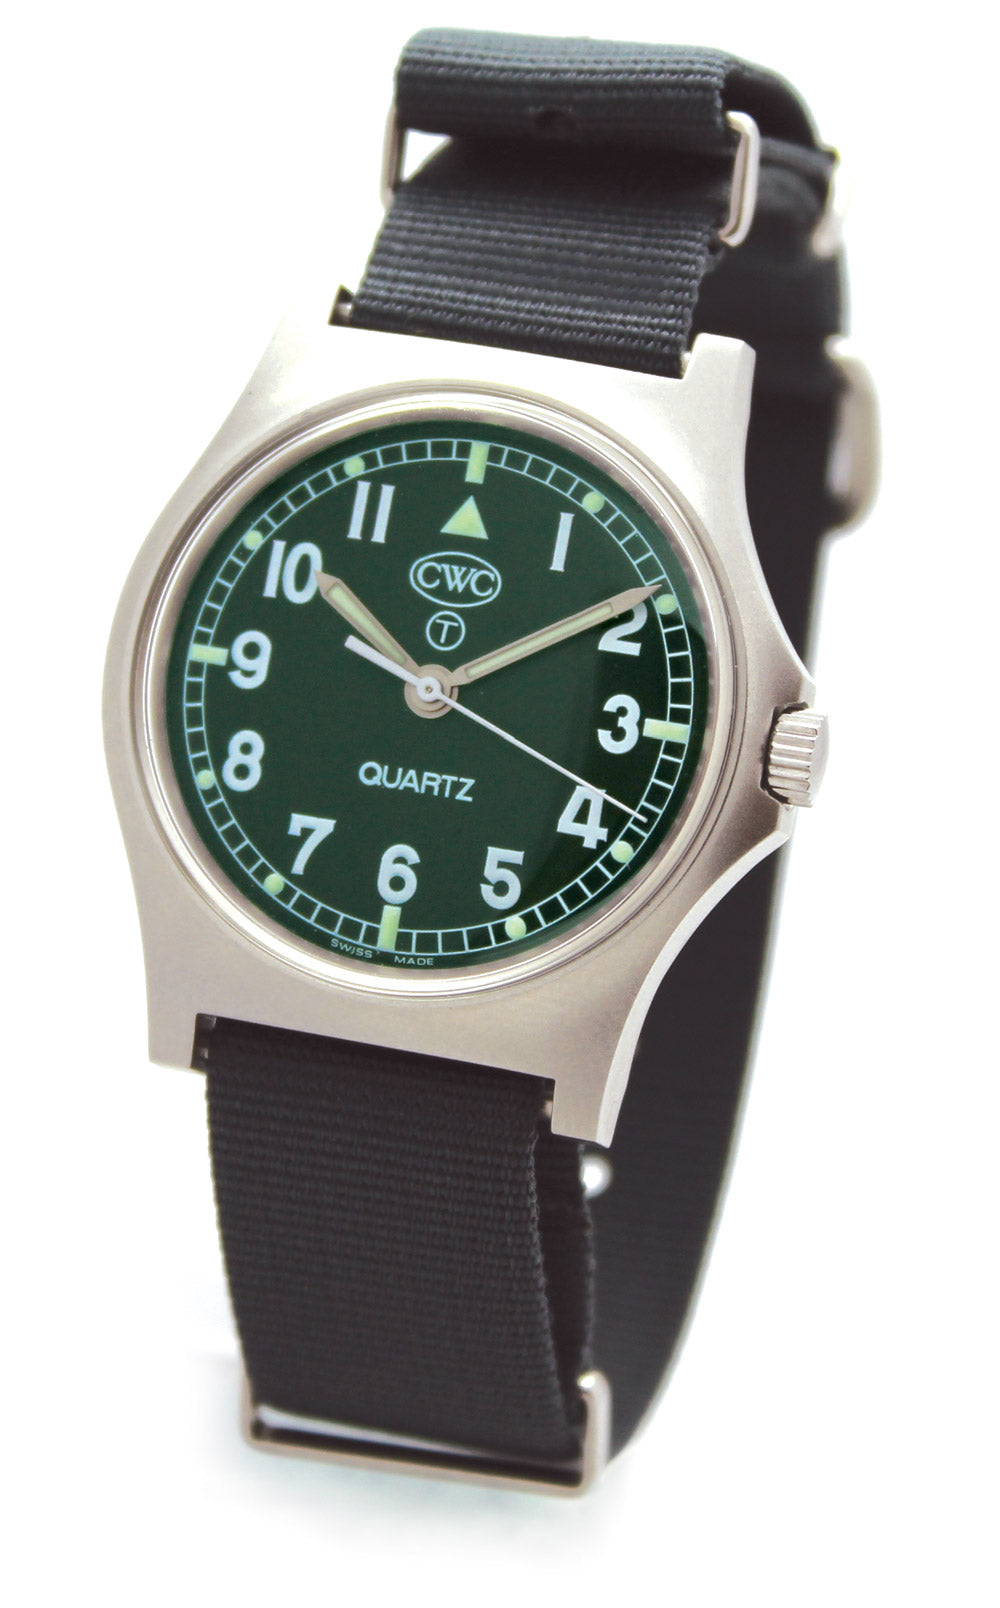 CWC G10 WATCH MILITARY GREEN